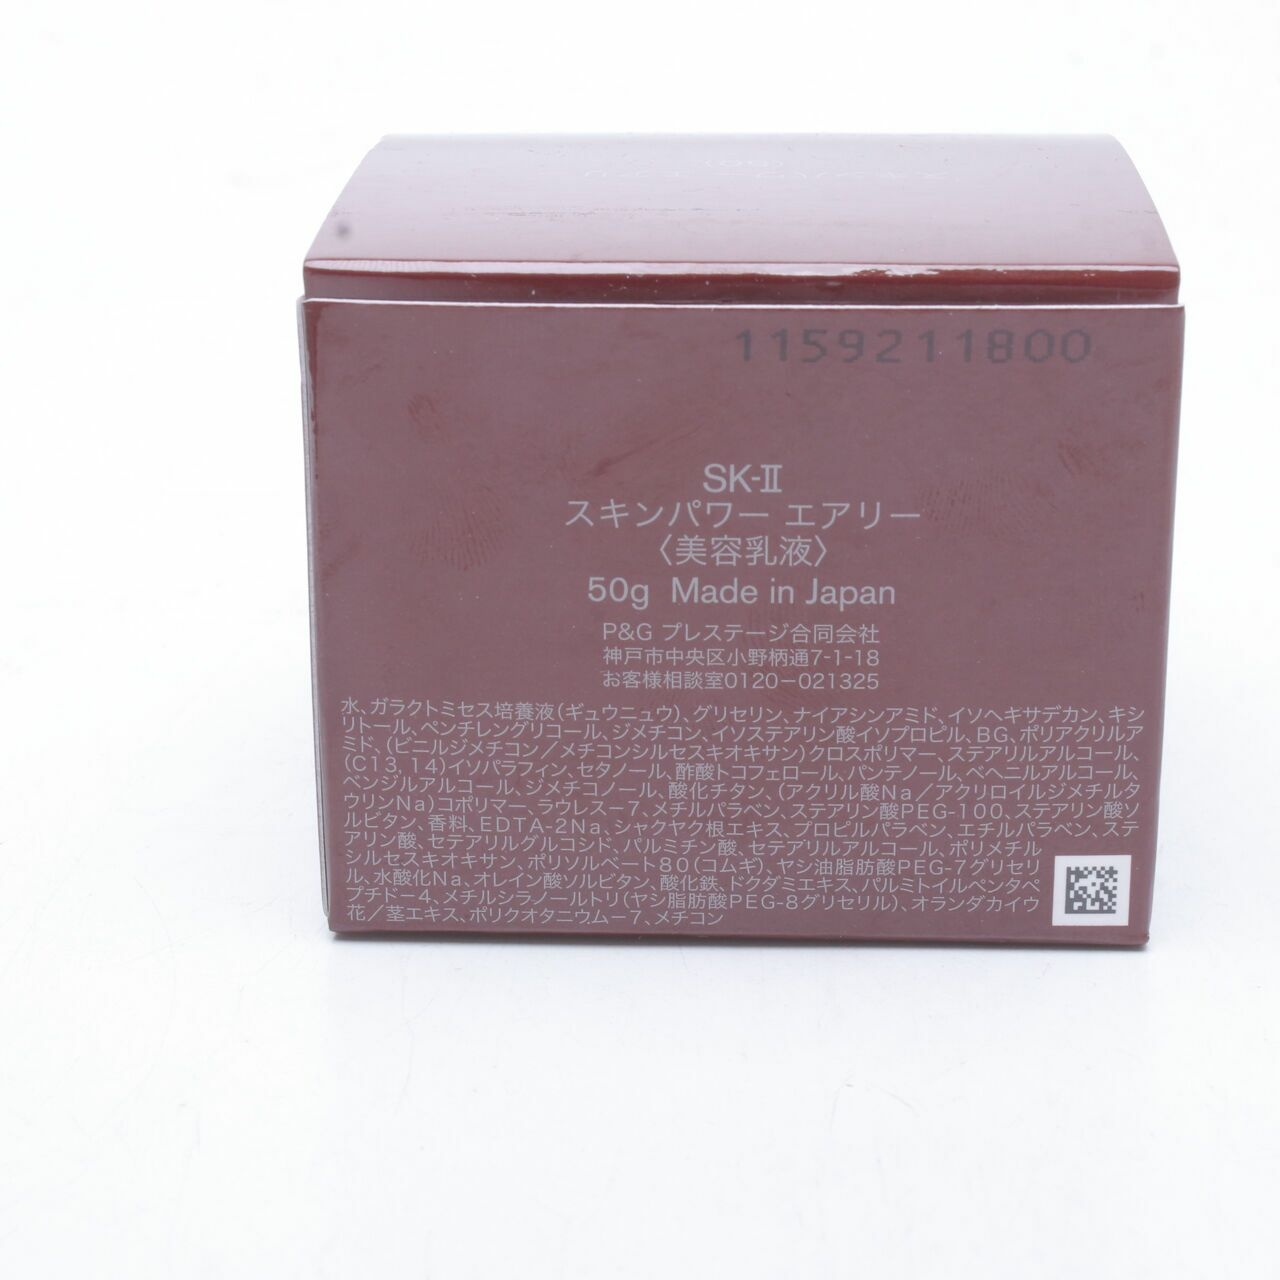 SK-II Skinpower Airy Milky Lotion Skin Care